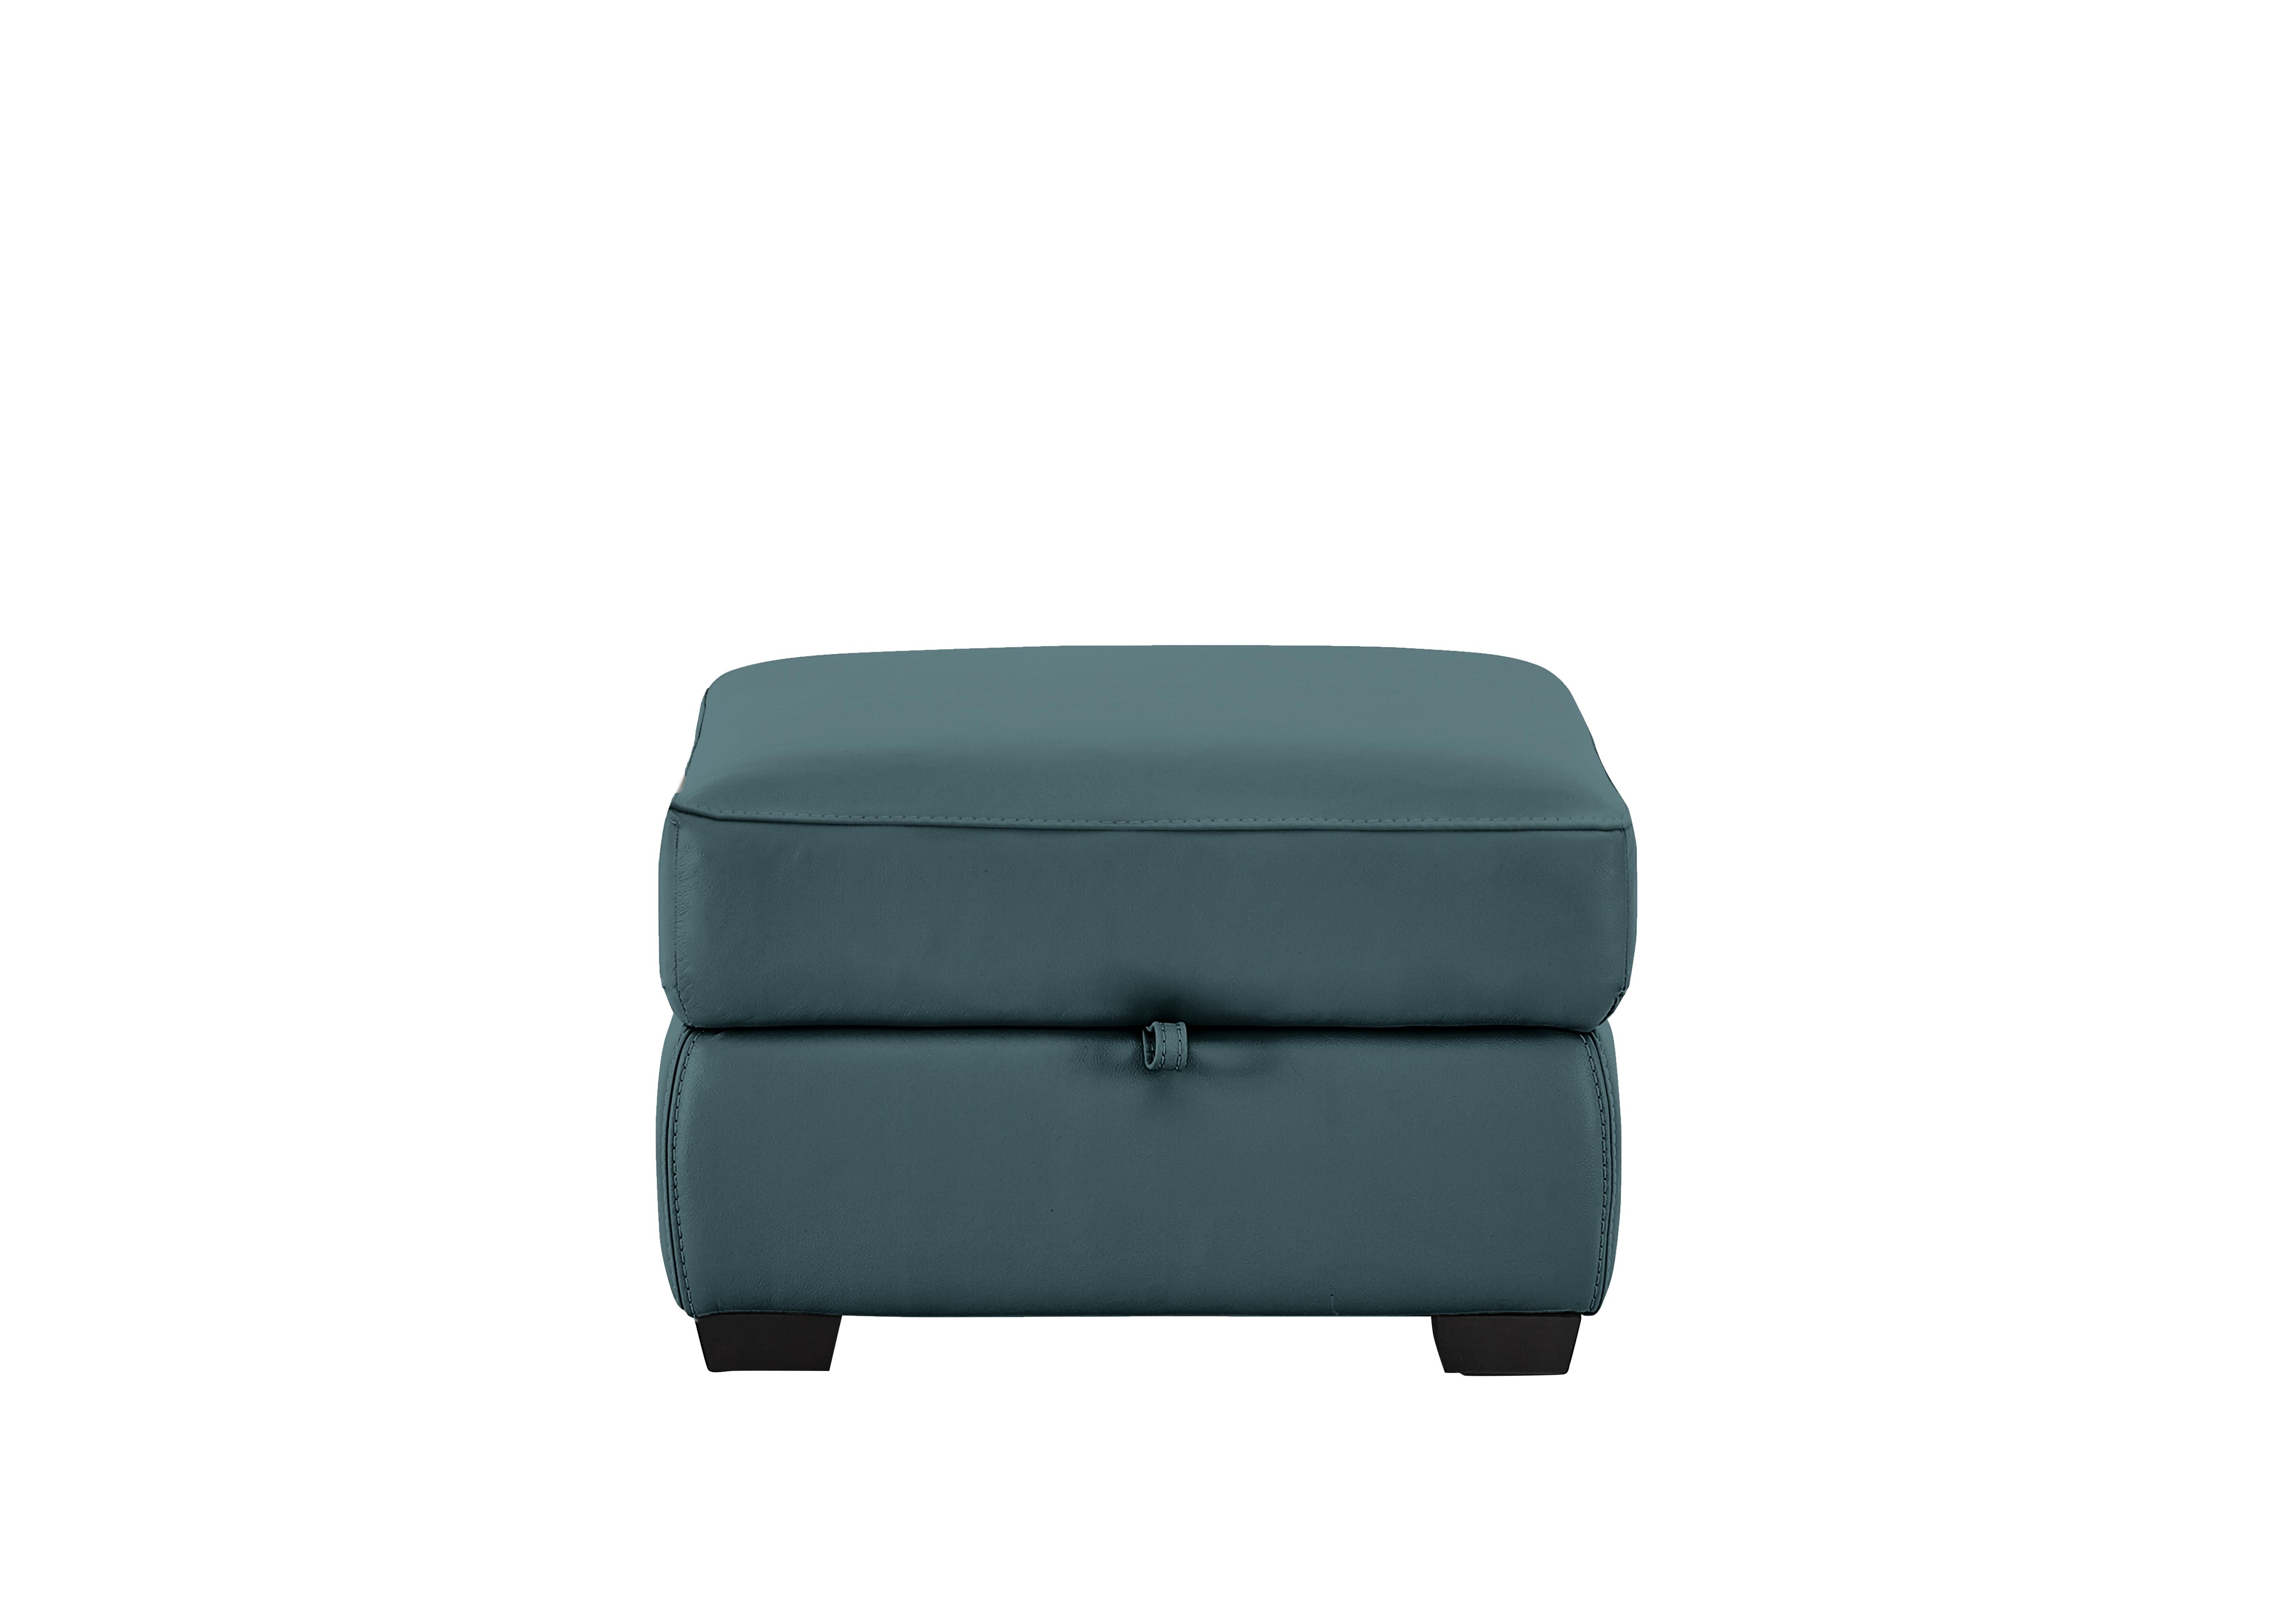 Starlight Express Leather Storage Footstool in Bv-301e Lake Green on Furniture Village